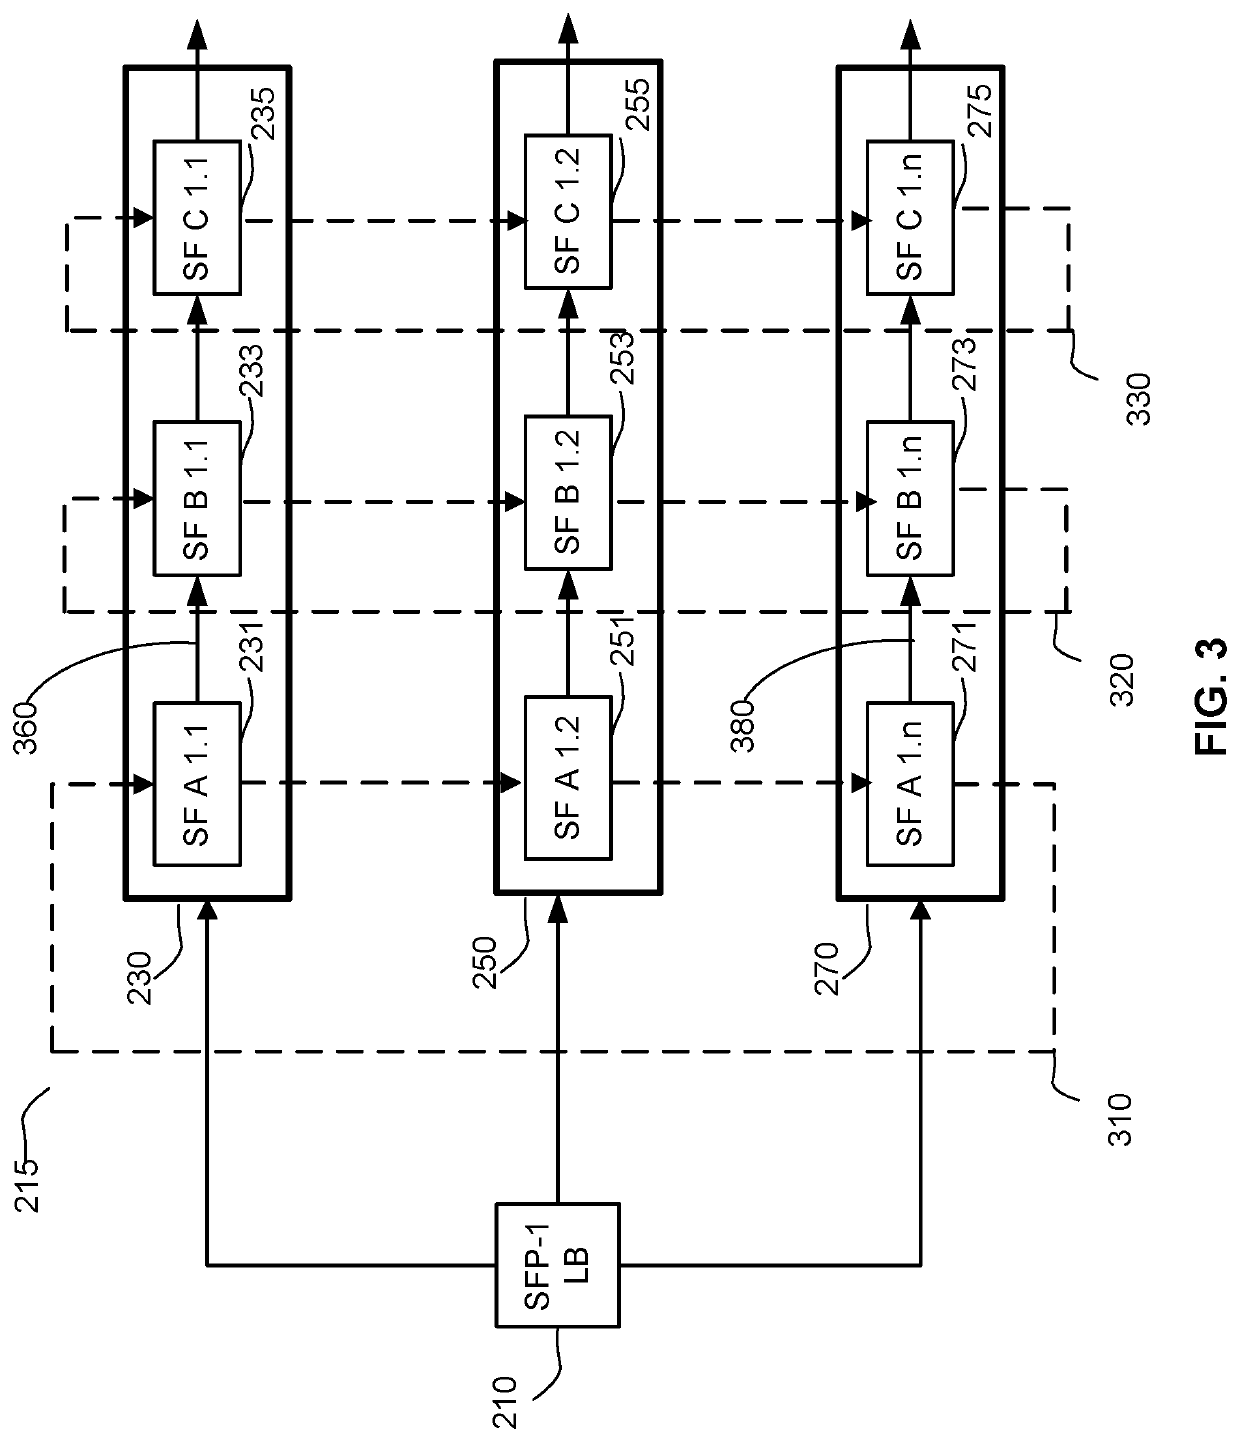 Method and apparatus for protecting stateful service function paths